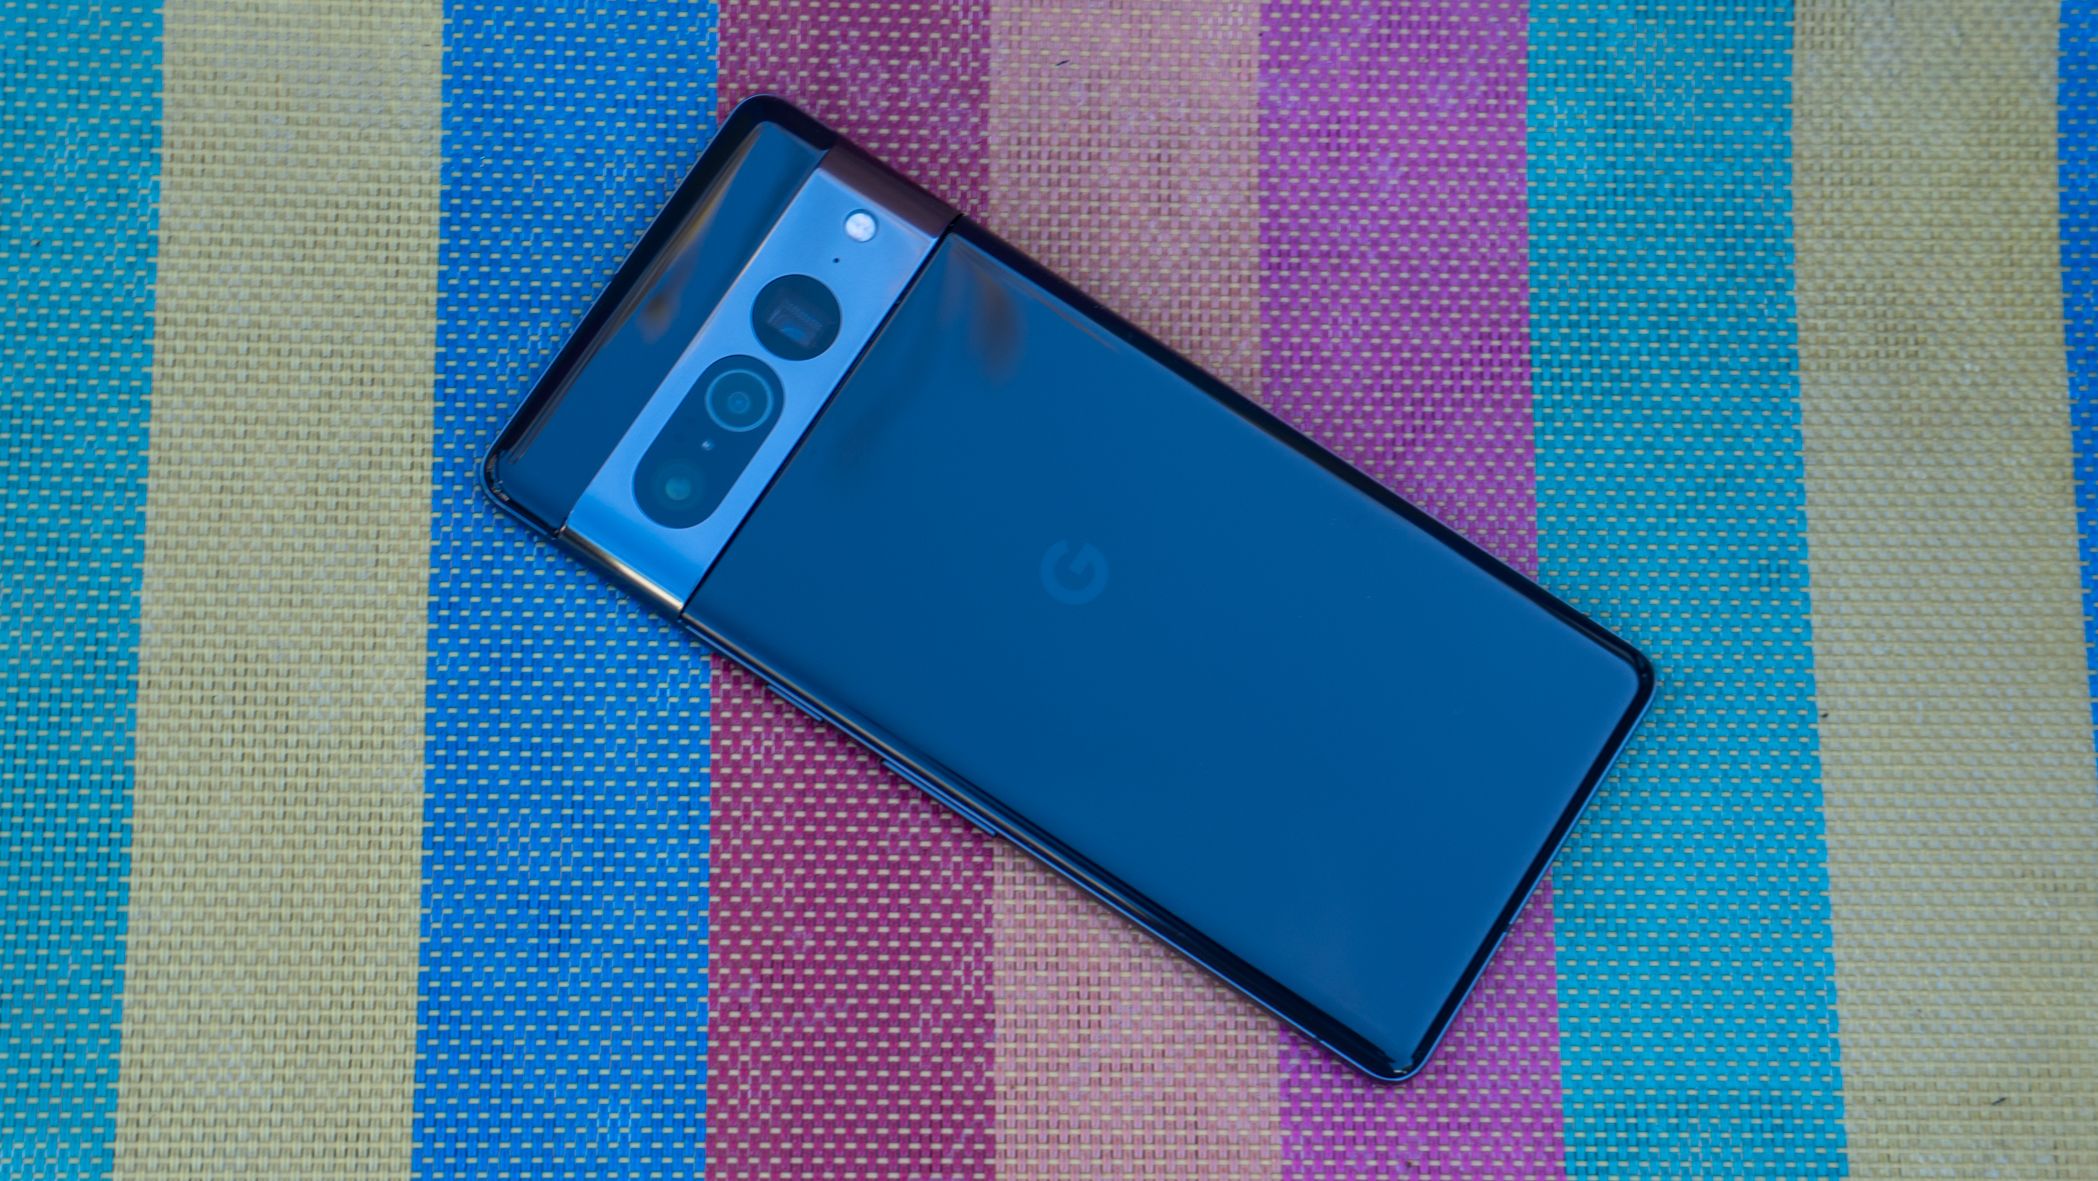 I have to stop using the Pixel 7a — but I don't want to